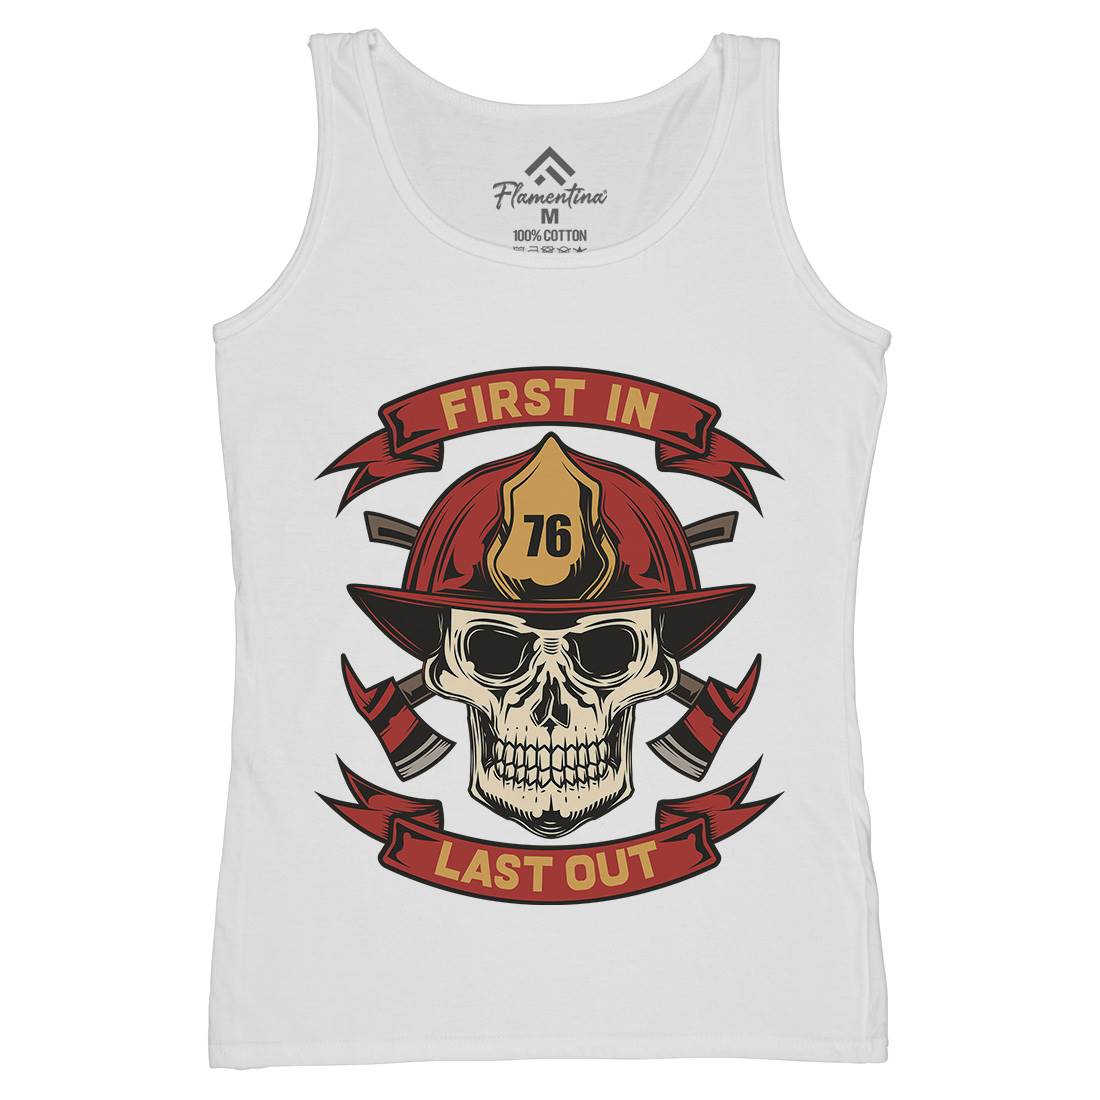 First In Last Out Womens Organic Tank Top Vest Firefighters C825